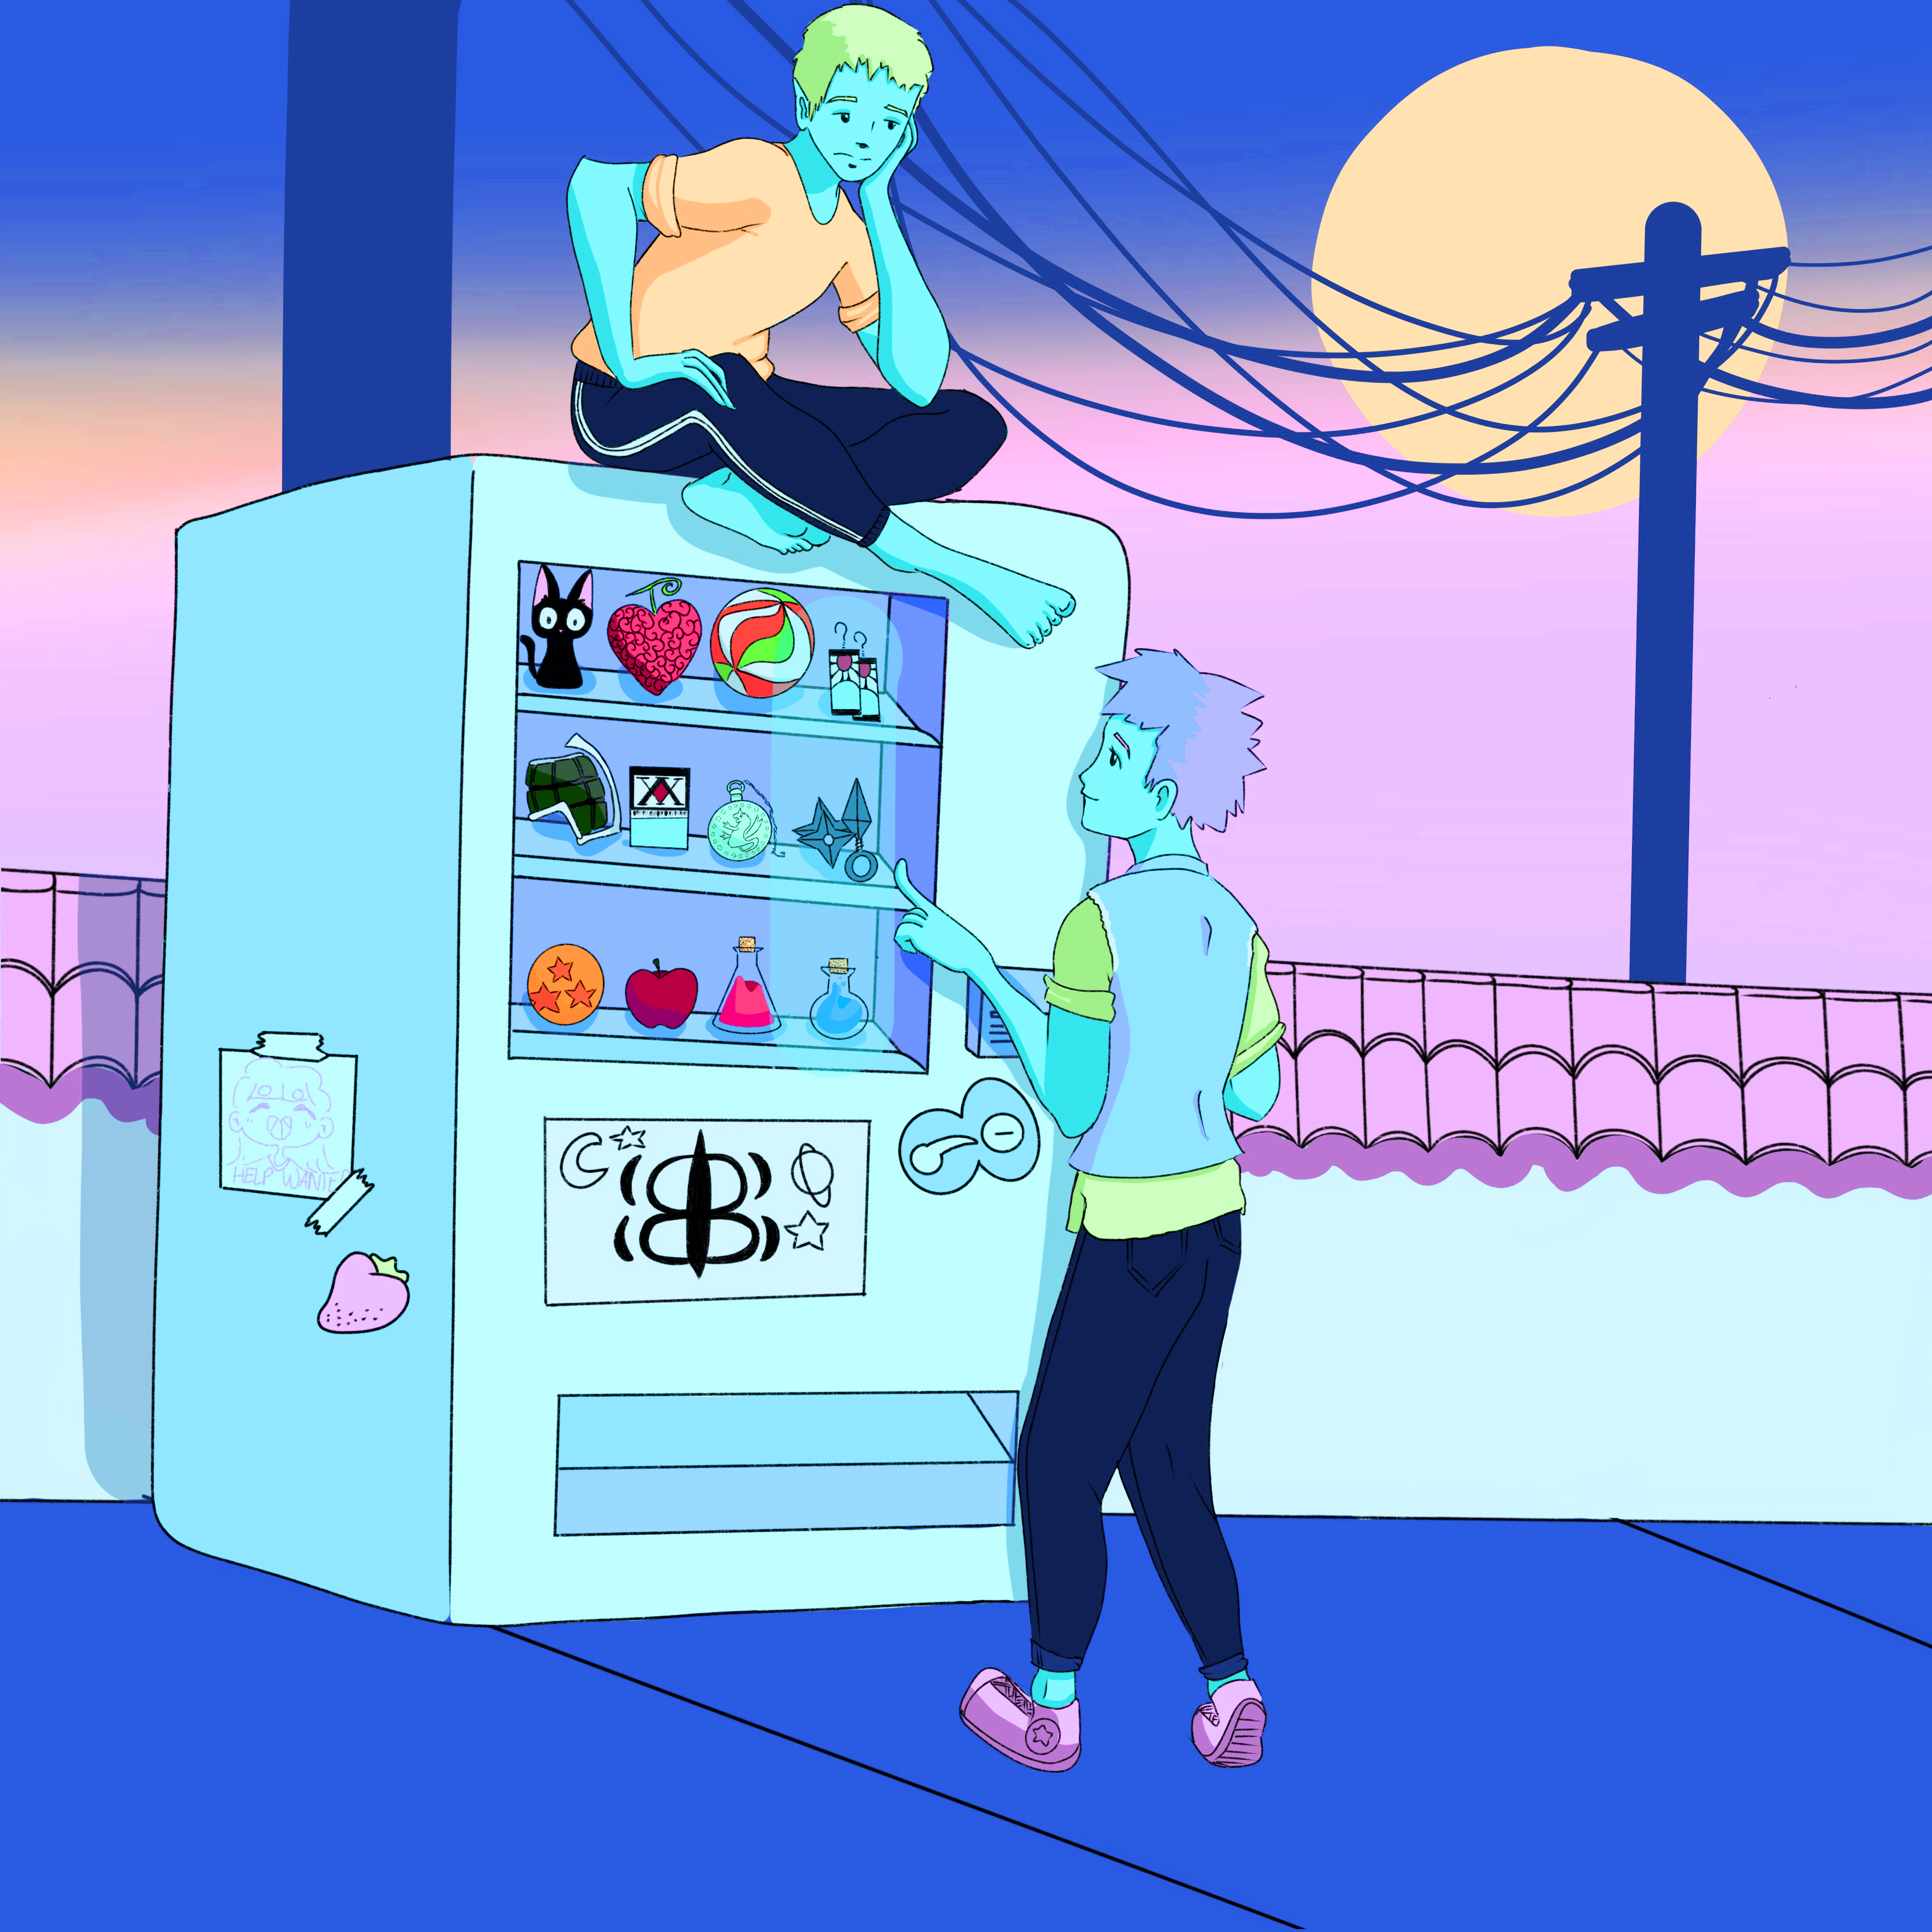 Digital drawing of one person sitting on top of a vending machine looking down at a second person standing in front facing the machine. The background shows telephone poles and a full moon. The image is mostly composed of soft blues, pinks, and yellows.